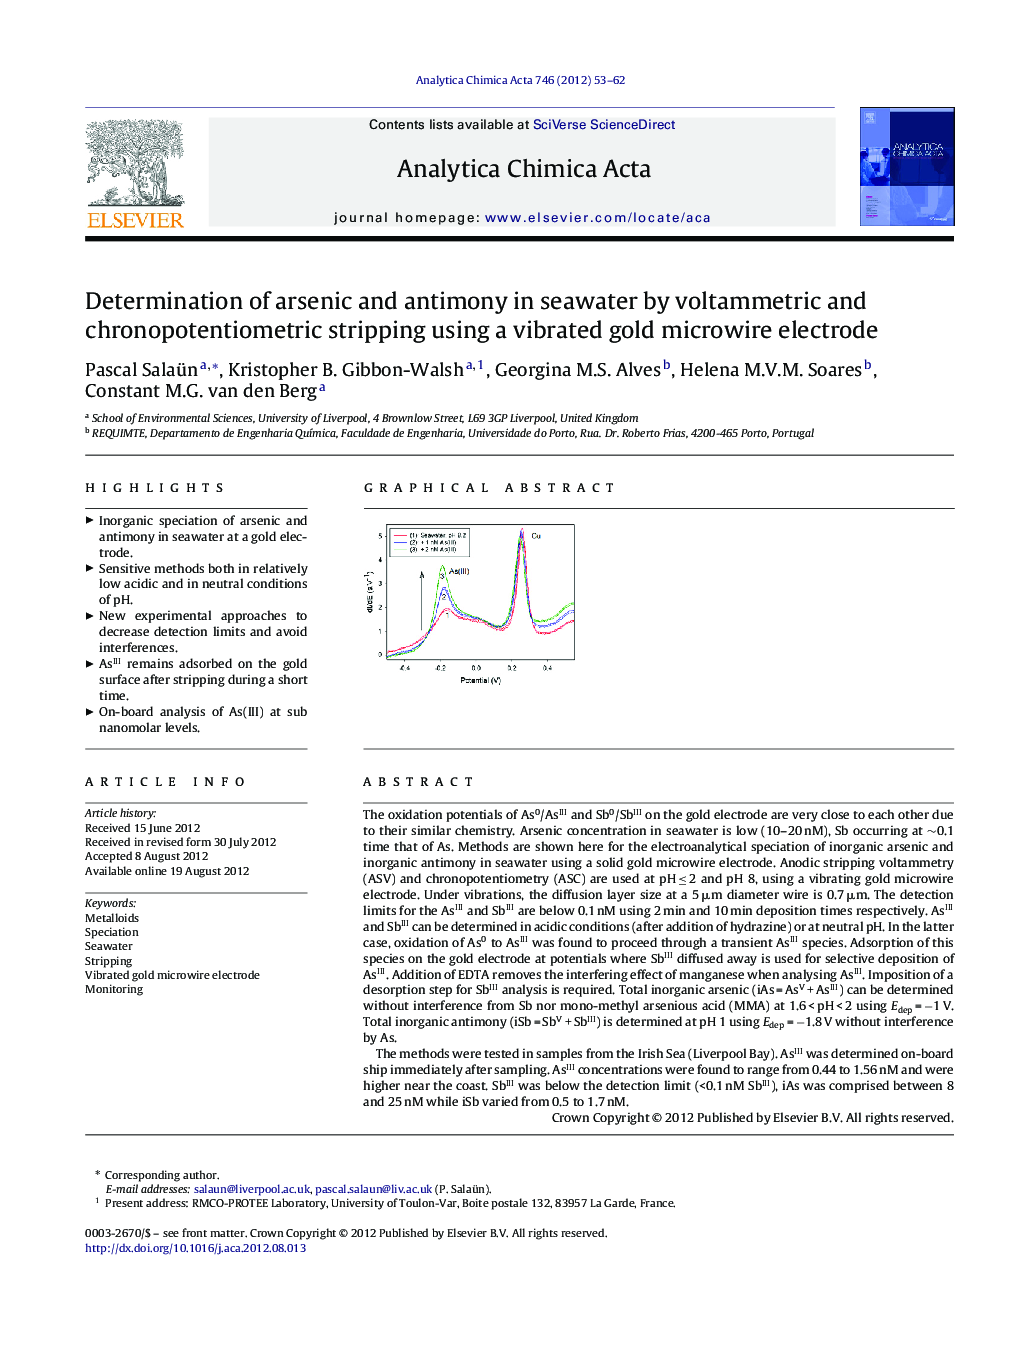 Determination of arsenic and antimony in seawater by voltammetric and chronopotentiometric stripping using a vibrated gold microwire electrode